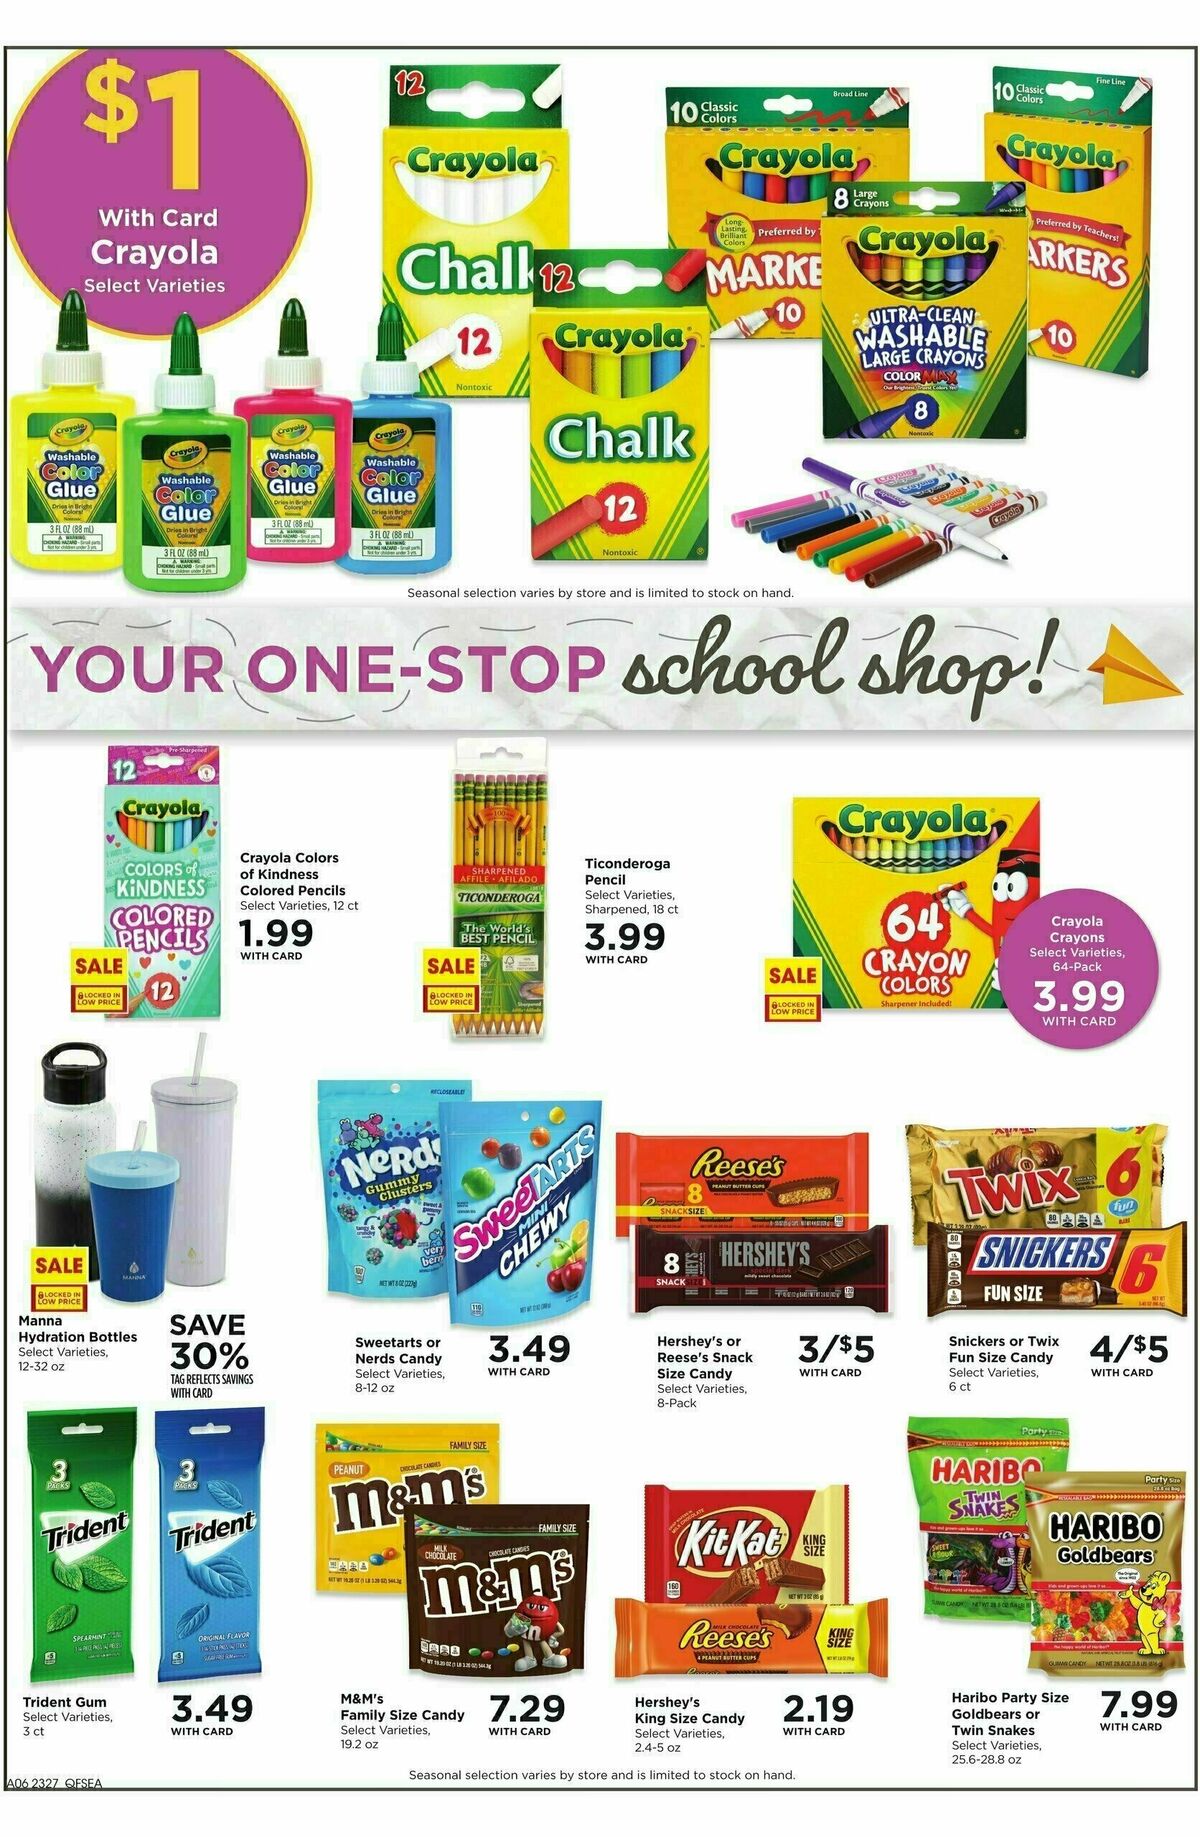 QFC Weekly Ad from August 2